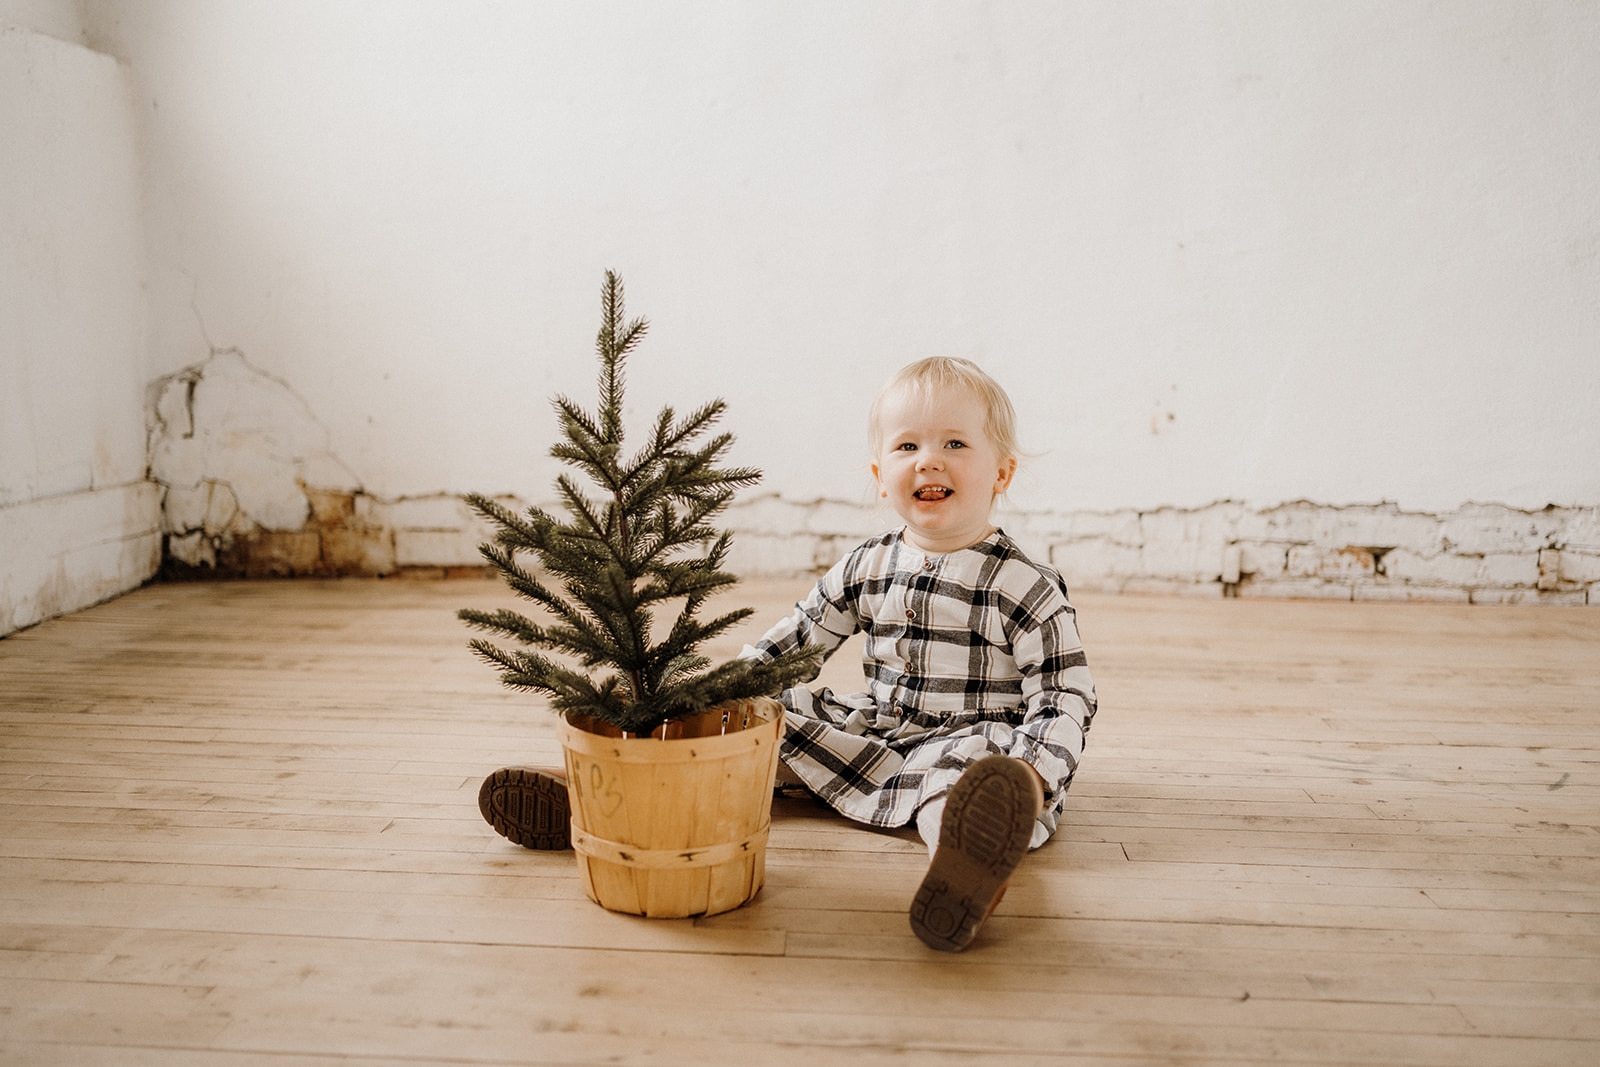 A toddler sitting on the ground with a plant.